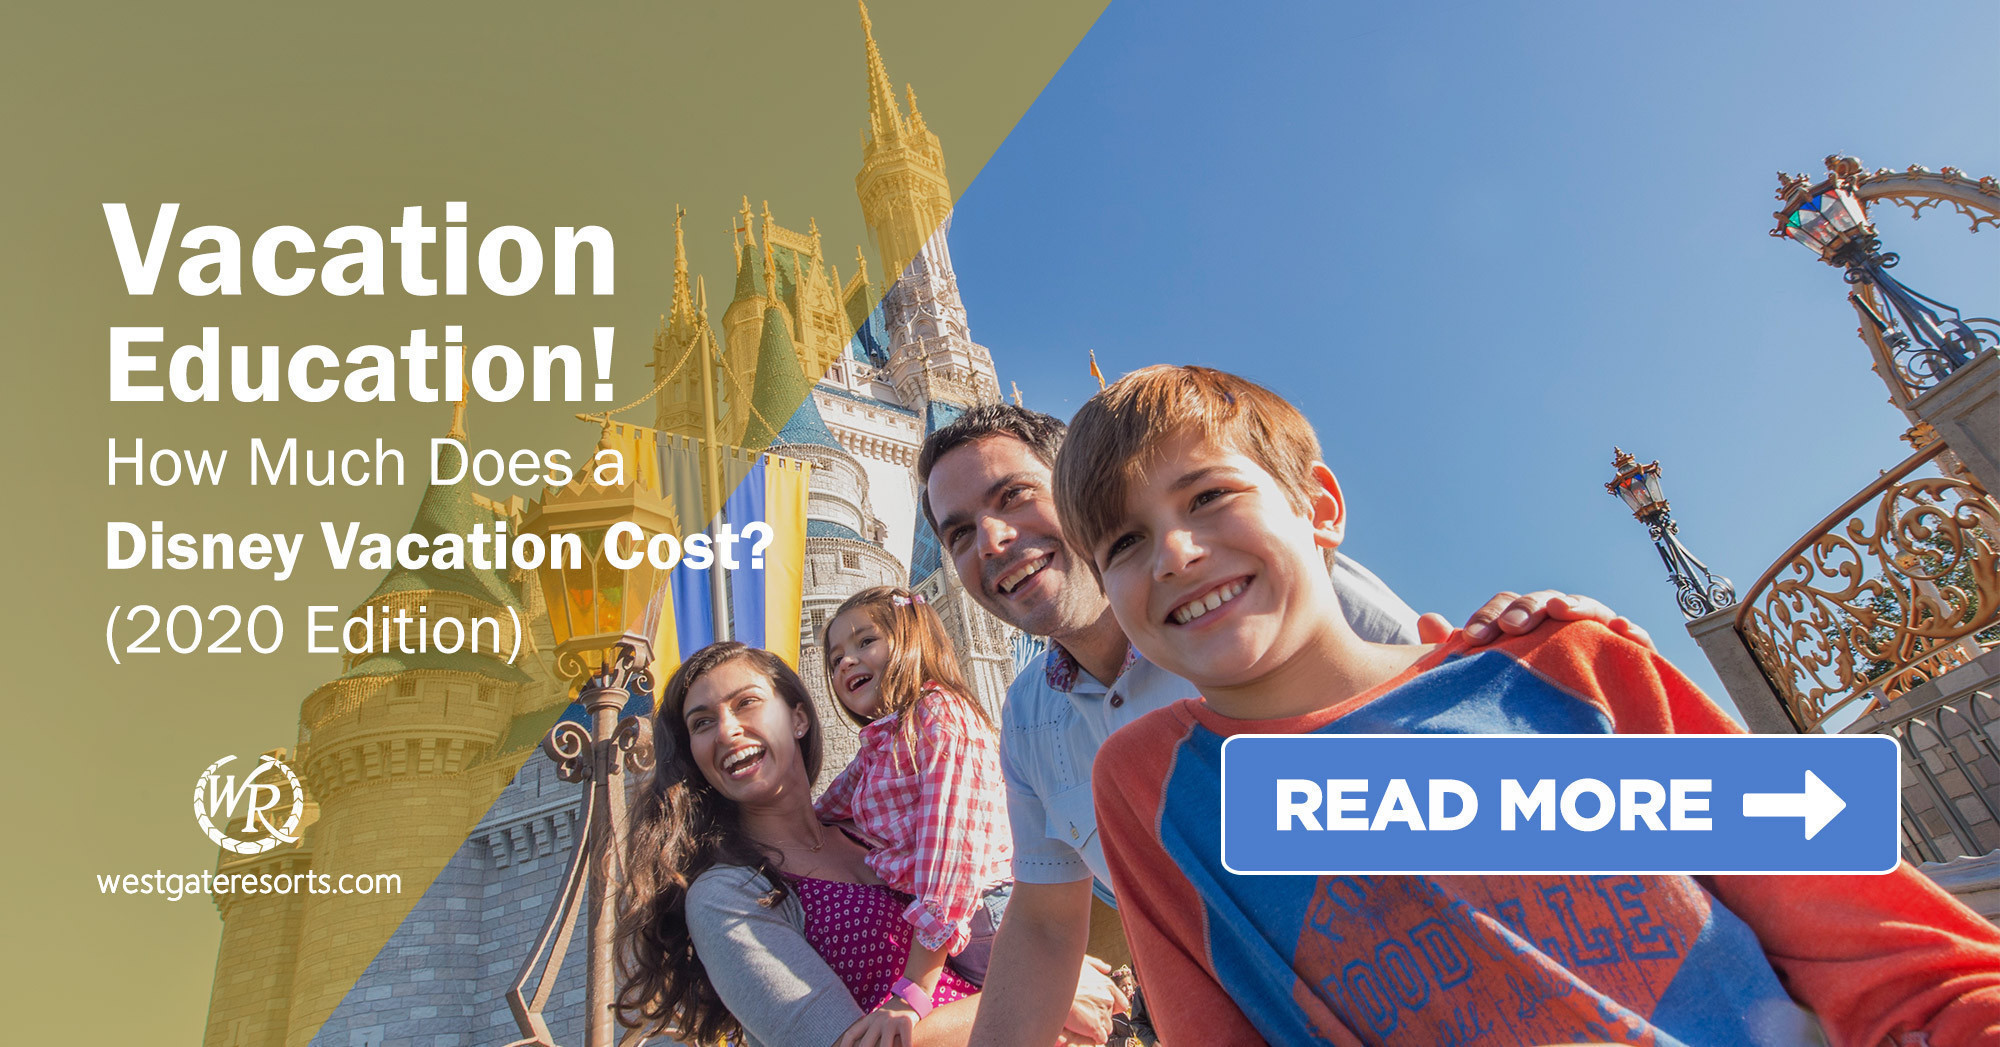 Vacation Education! How Much Does a Disney Vacation Cost (2020 Edition)?